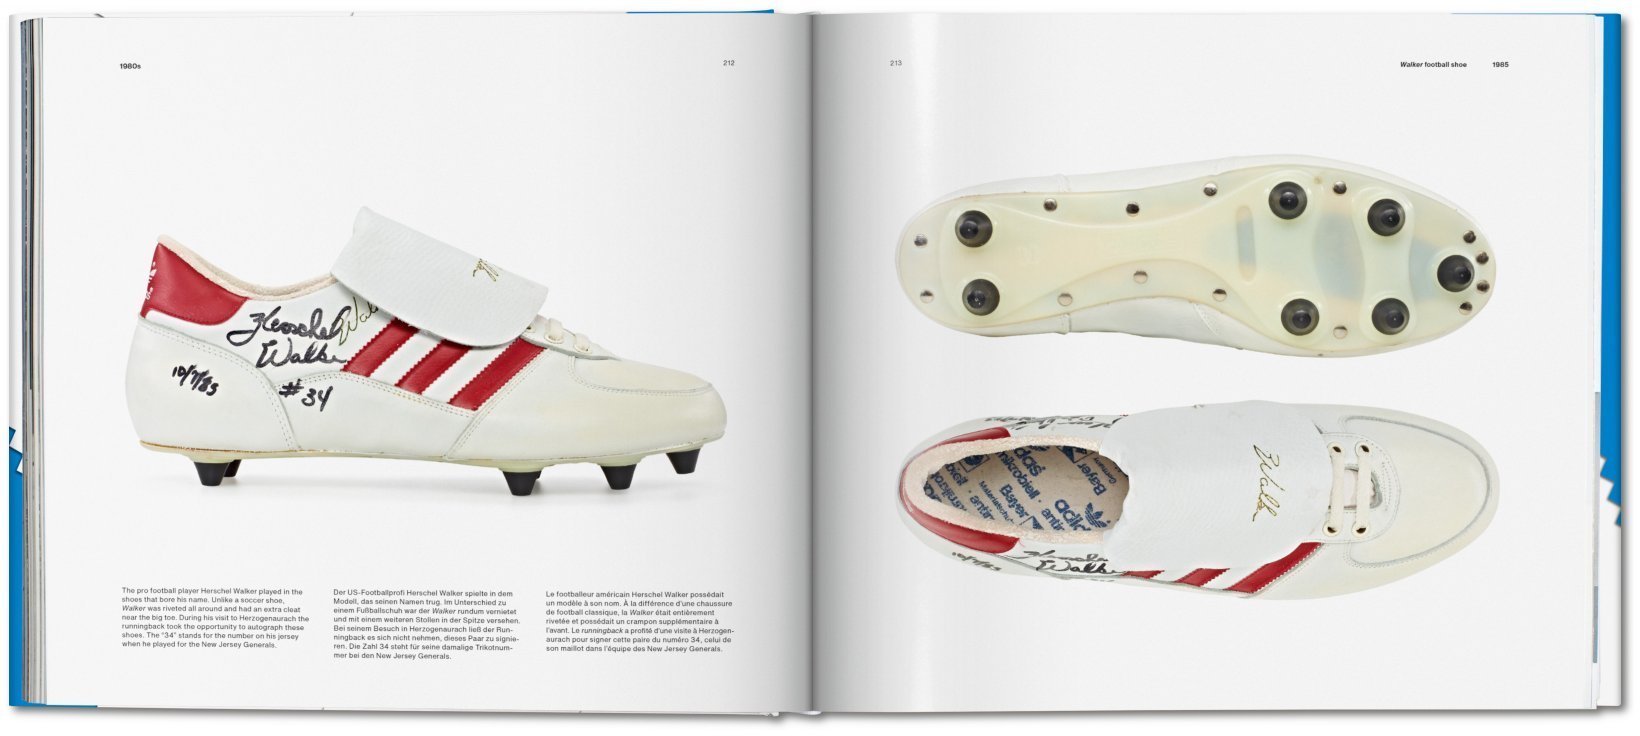 adidas_archive_xl_int_open001_212_213_04687_2001131118_id_1286211